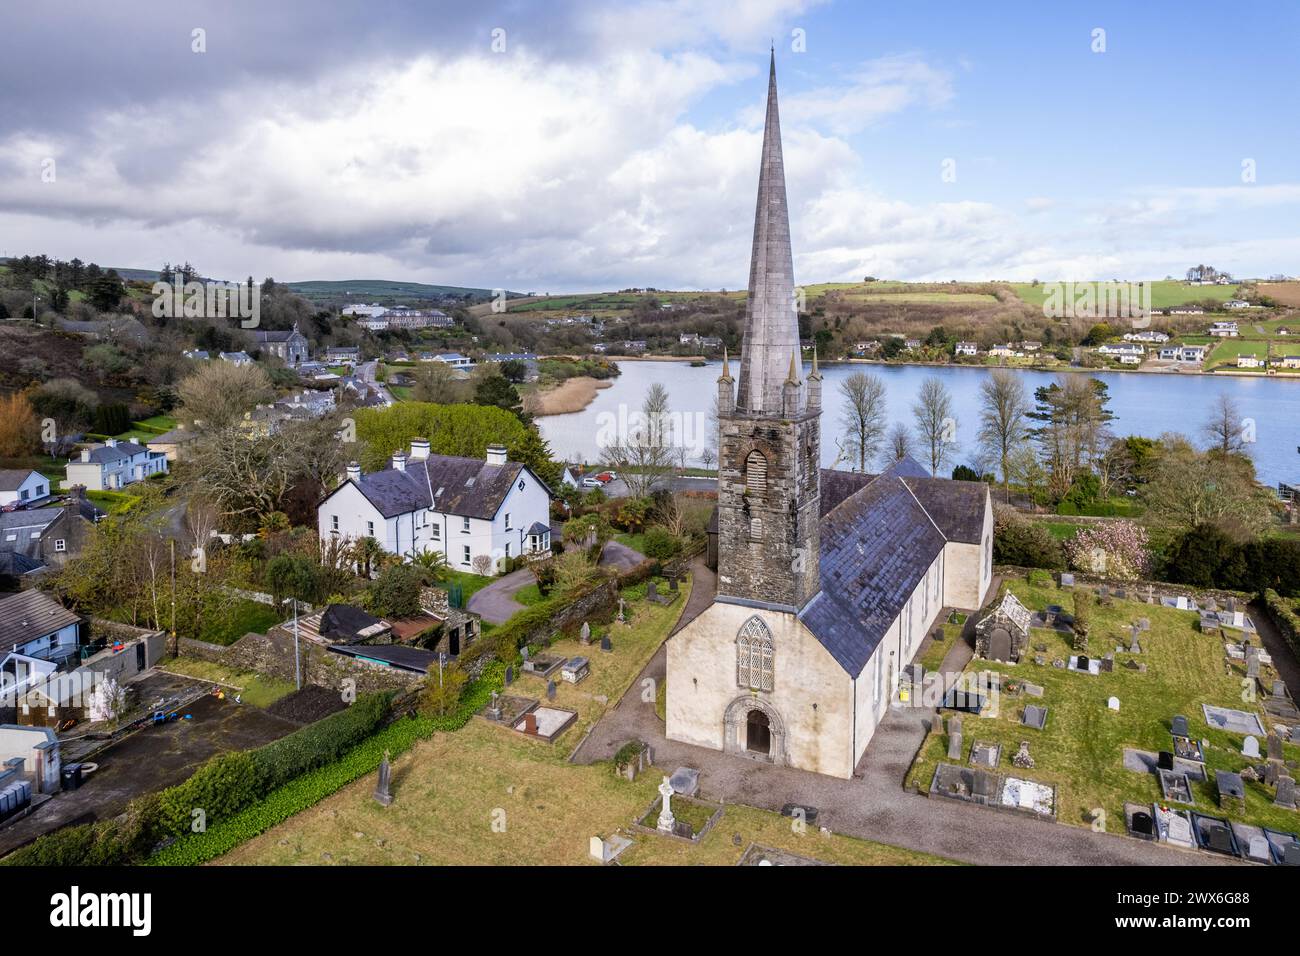 Church of Ireland Rosscarbery Cathedral, Rosscarbery, West Cork, Irland. Stockfoto